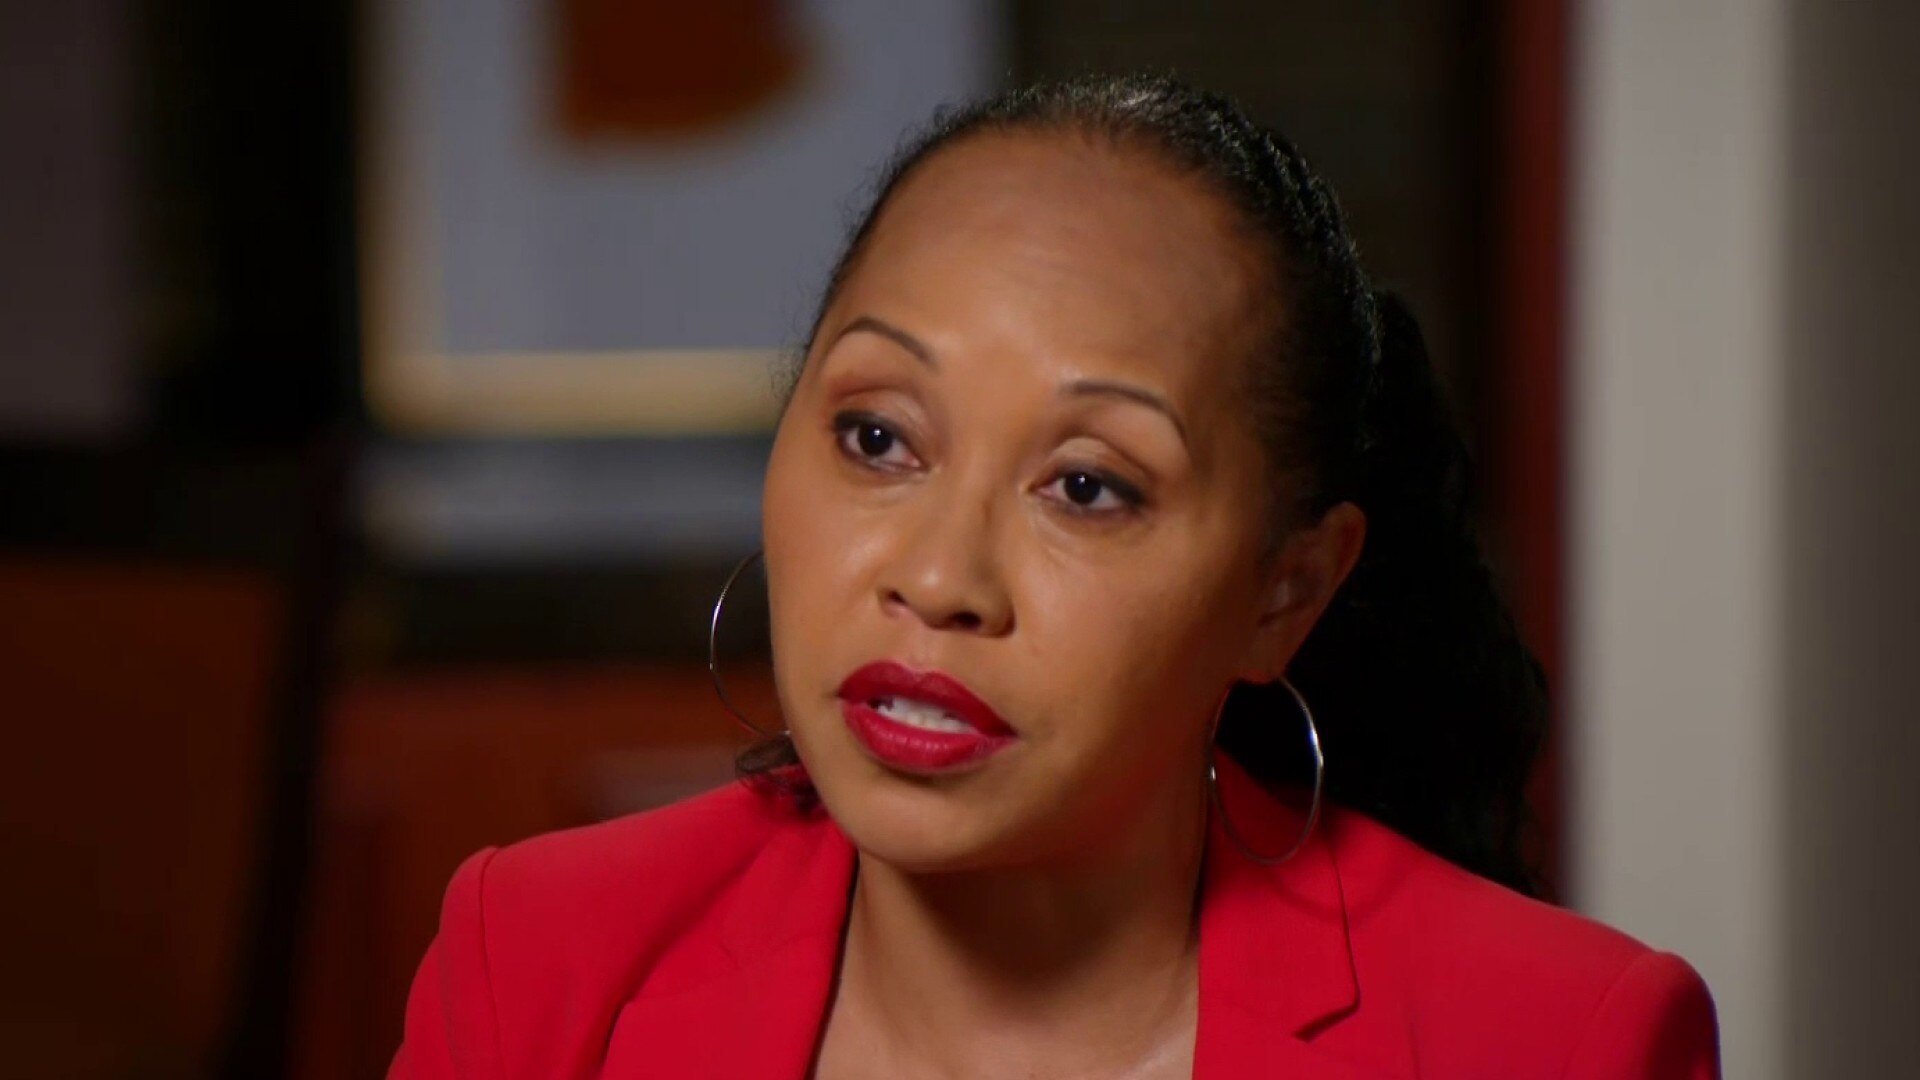 Watch Nbc Nightly News With Lester Holt Excerpt Human Rights Lawyer On 